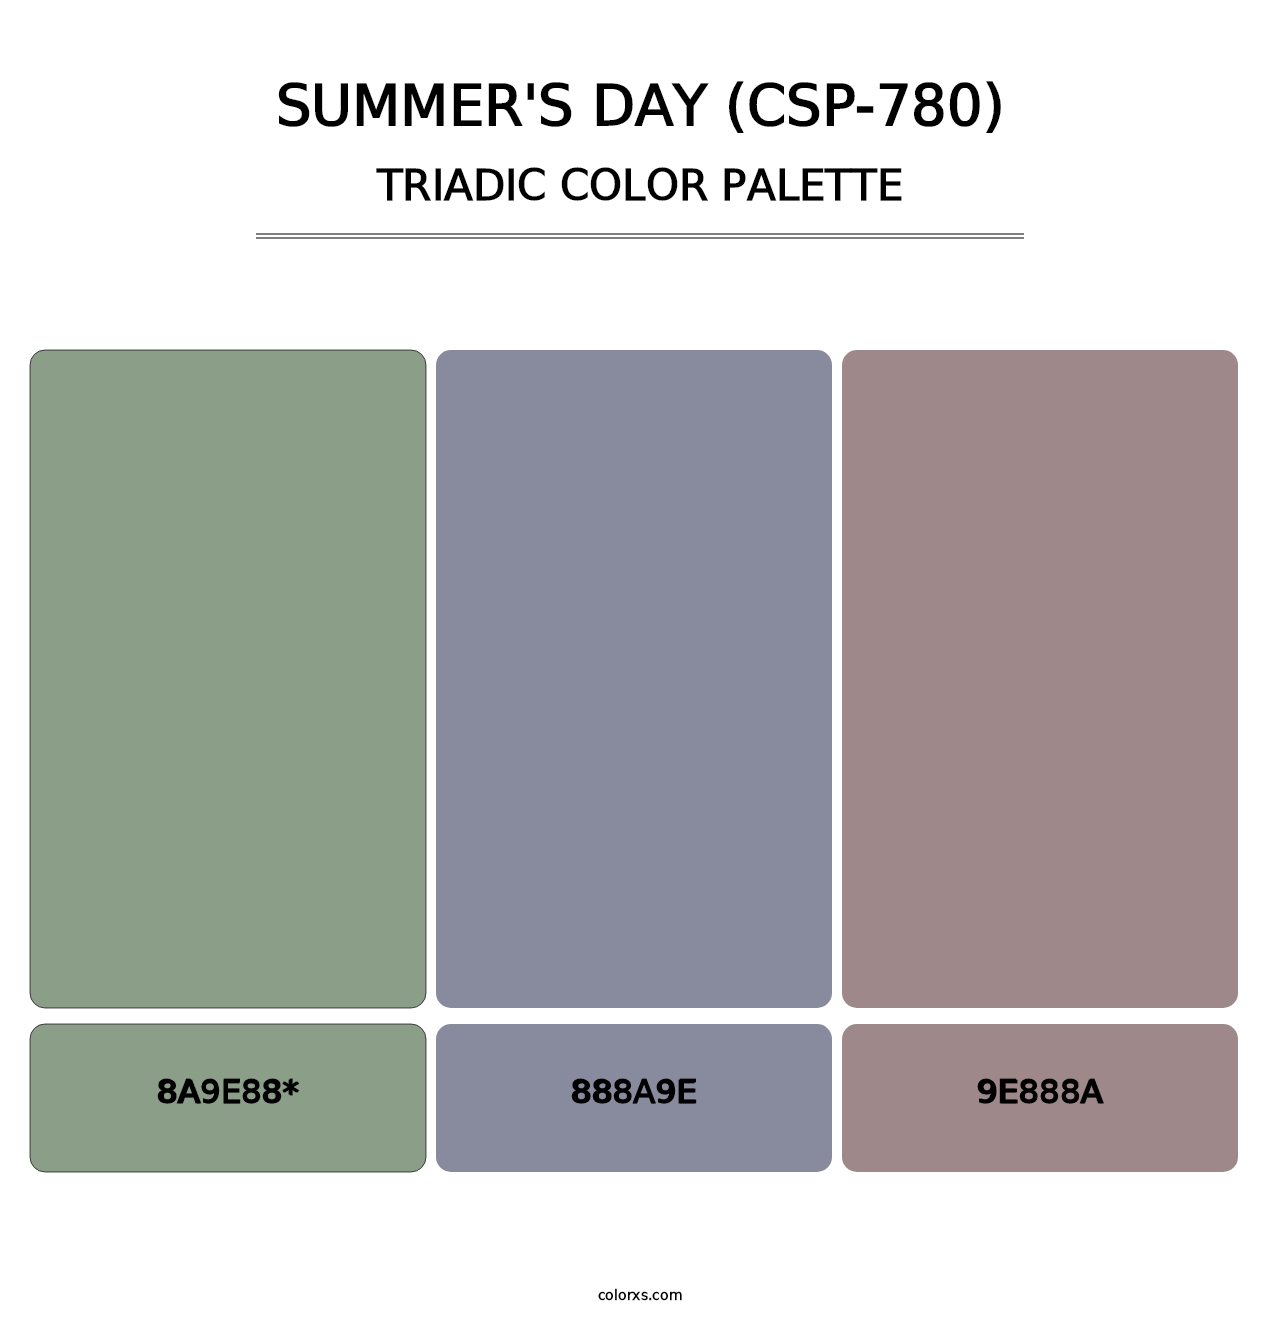 Summer's Day (CSP-780) - Triadic Color Palette